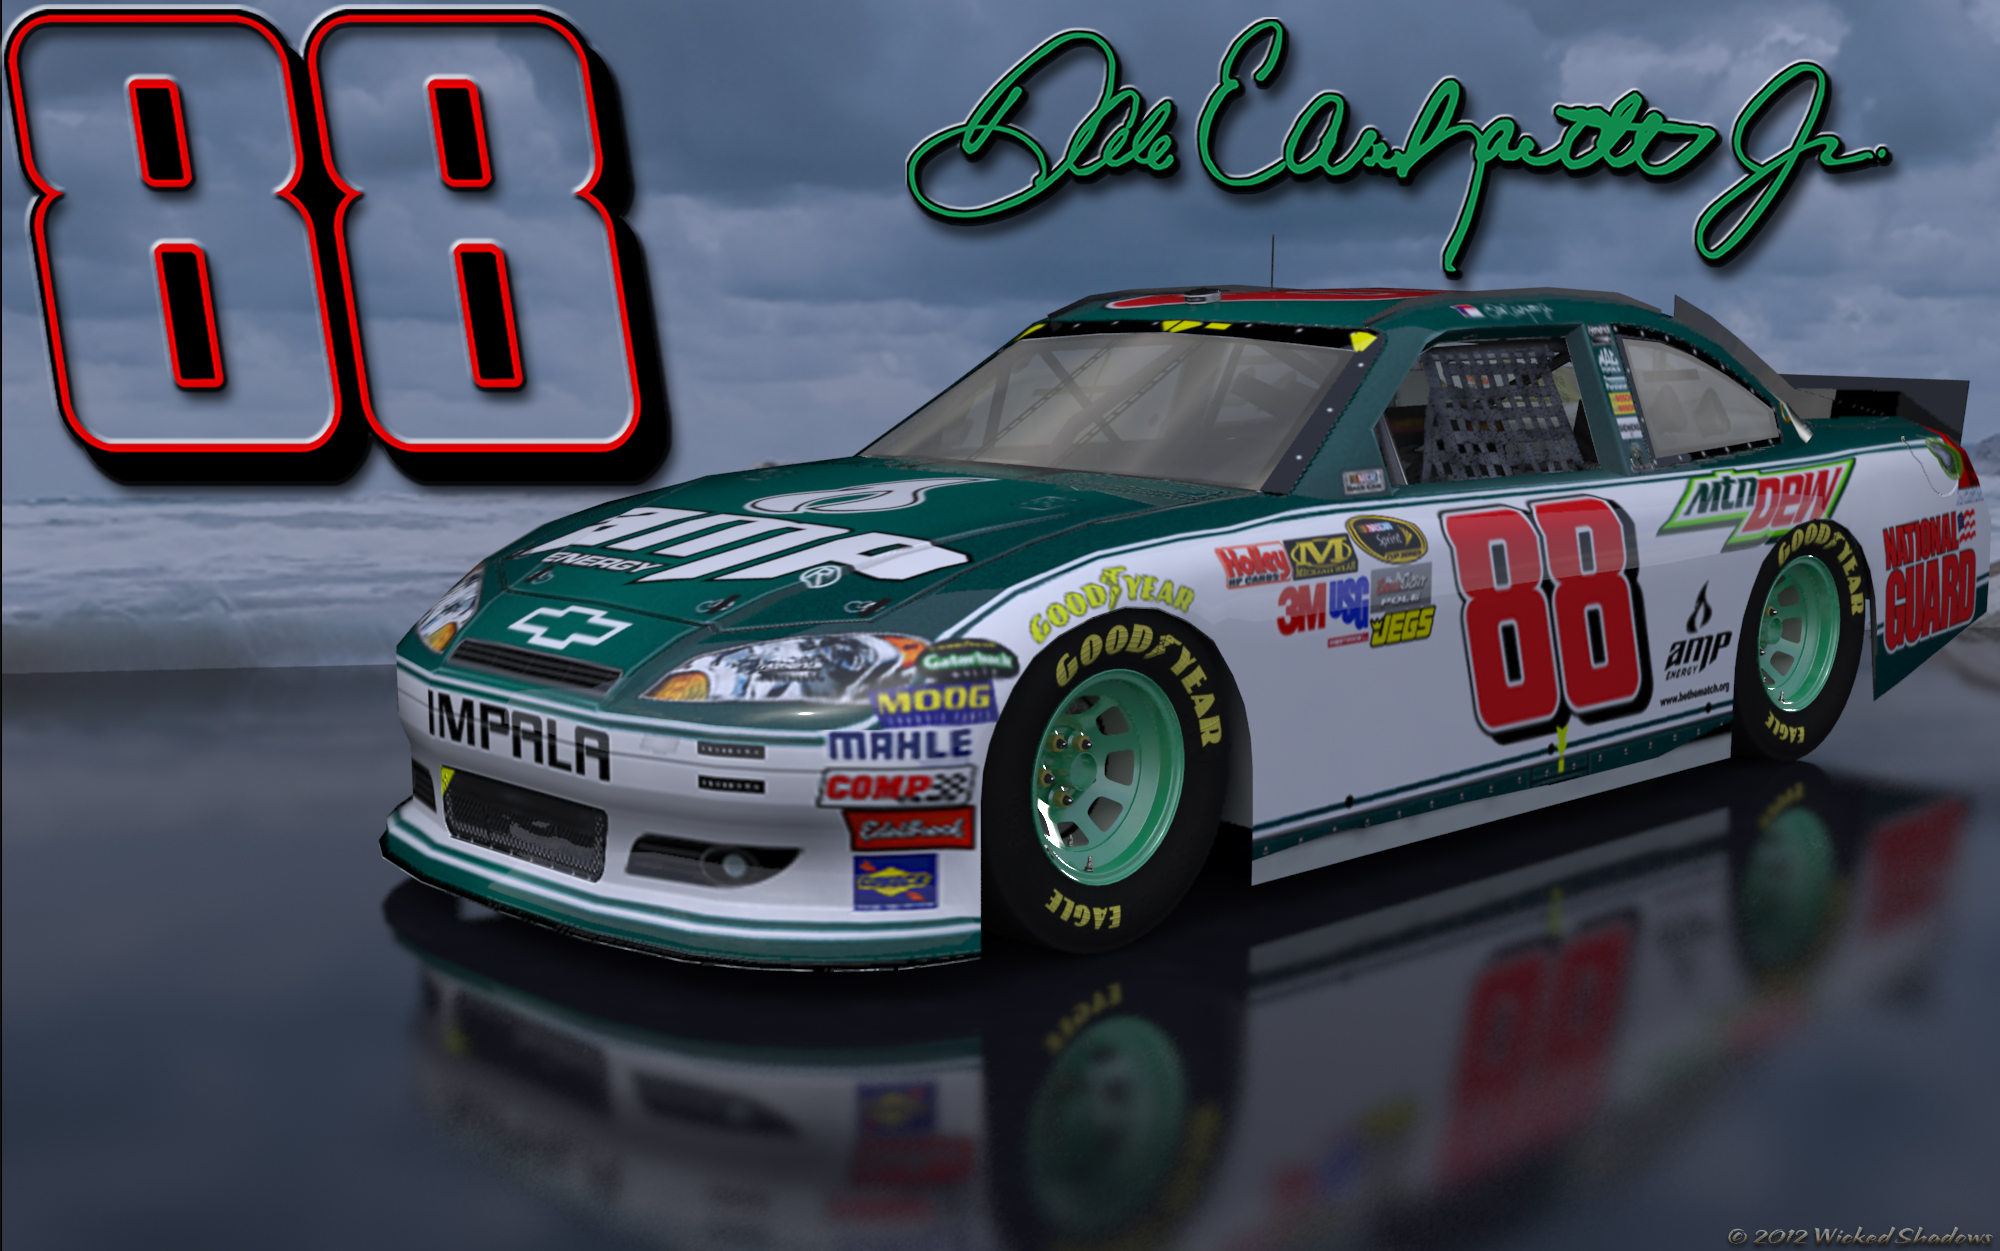 Wallpaper By Wicked Shadows Dale Earnhardt Jr Amp Green Outdoors